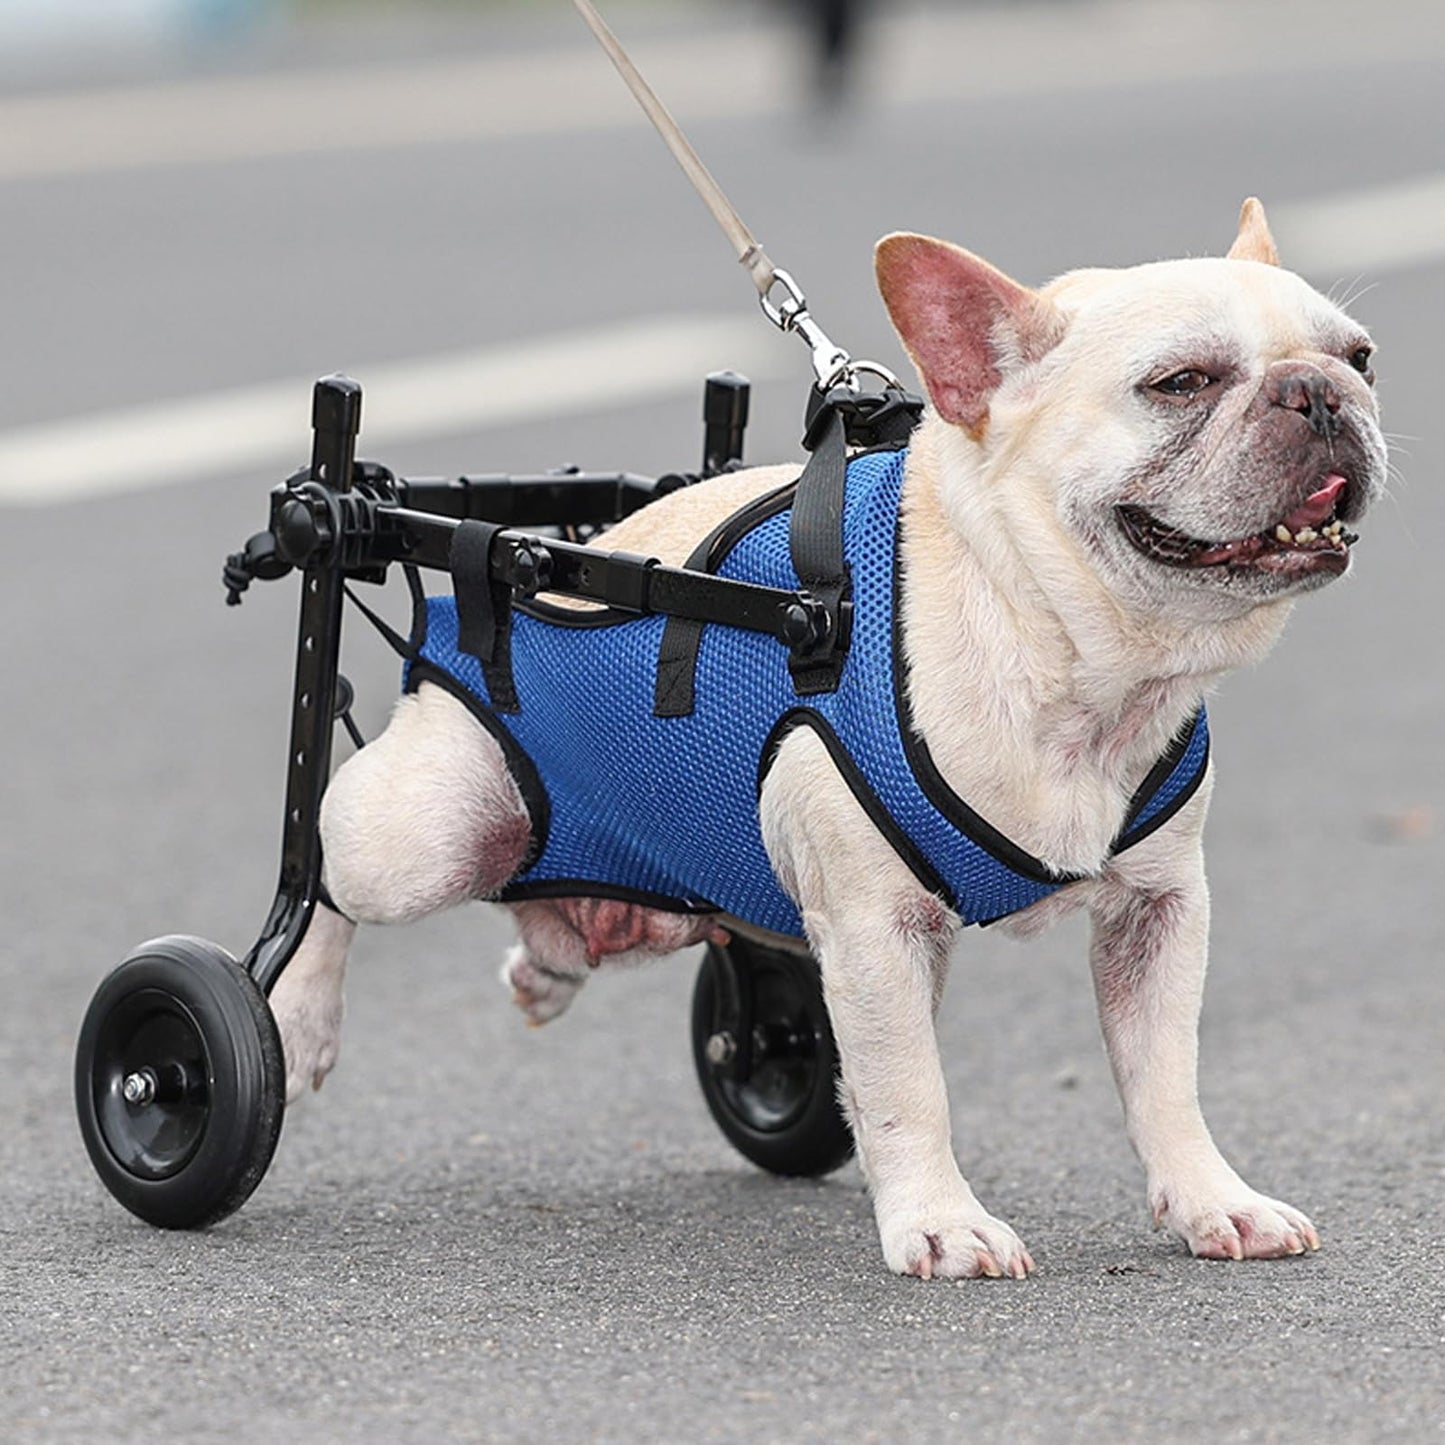 Dog Wheelchair for Back Legs, Dog Transport Vehicle,Adjustable Dog Wheelchair for Disabled Hind Legs Walking,for Back Legs Disability, Paralysis, Injury, Hind Limb Weakness Pet